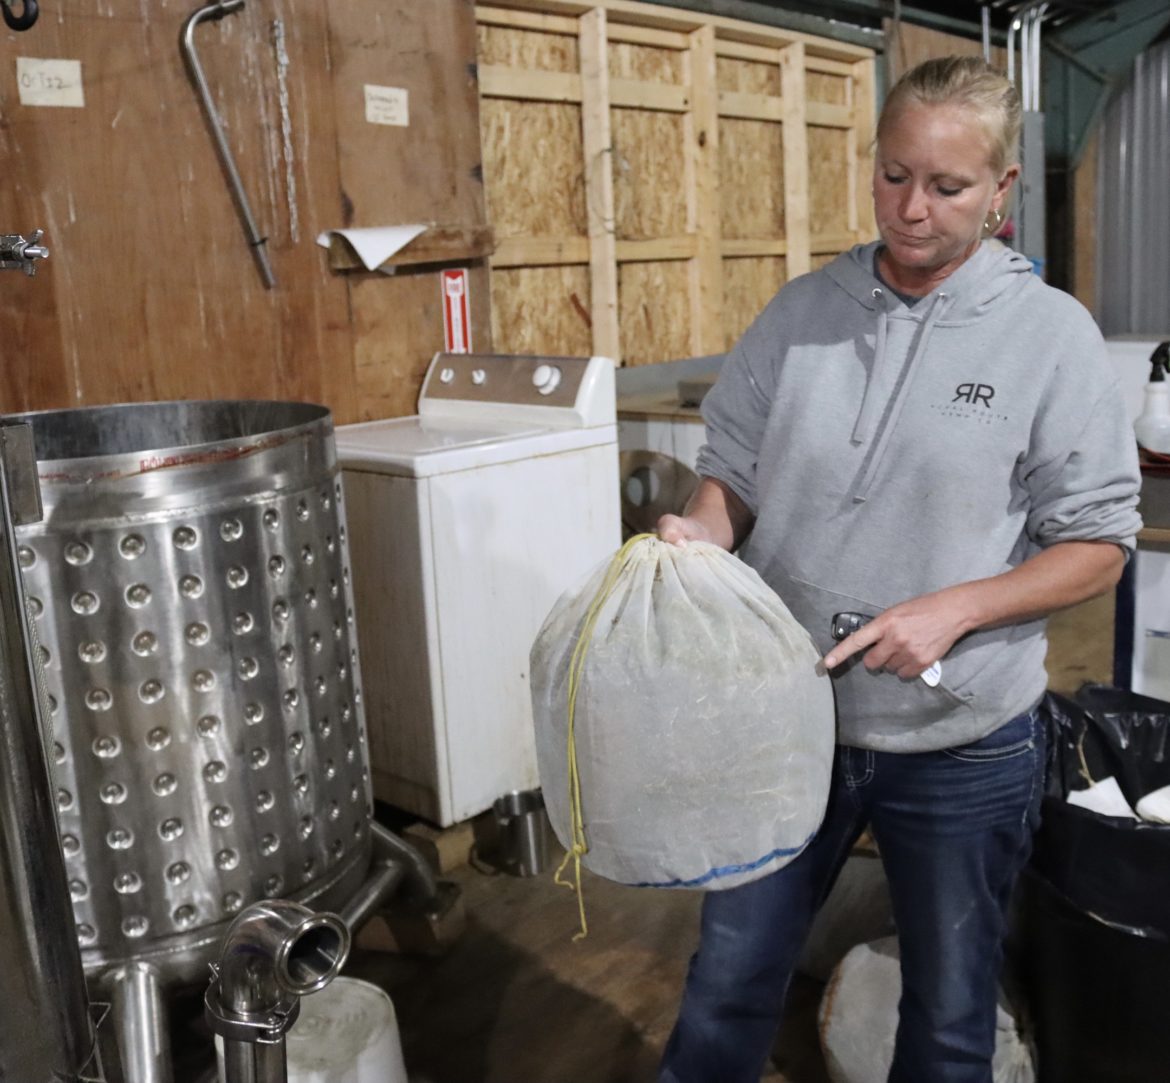 Michelle Poindexter prepares a bag of ground hemp to go into the silver agitator (left) which allows the cold ethanol to extract the cannabinoids from the biomass.